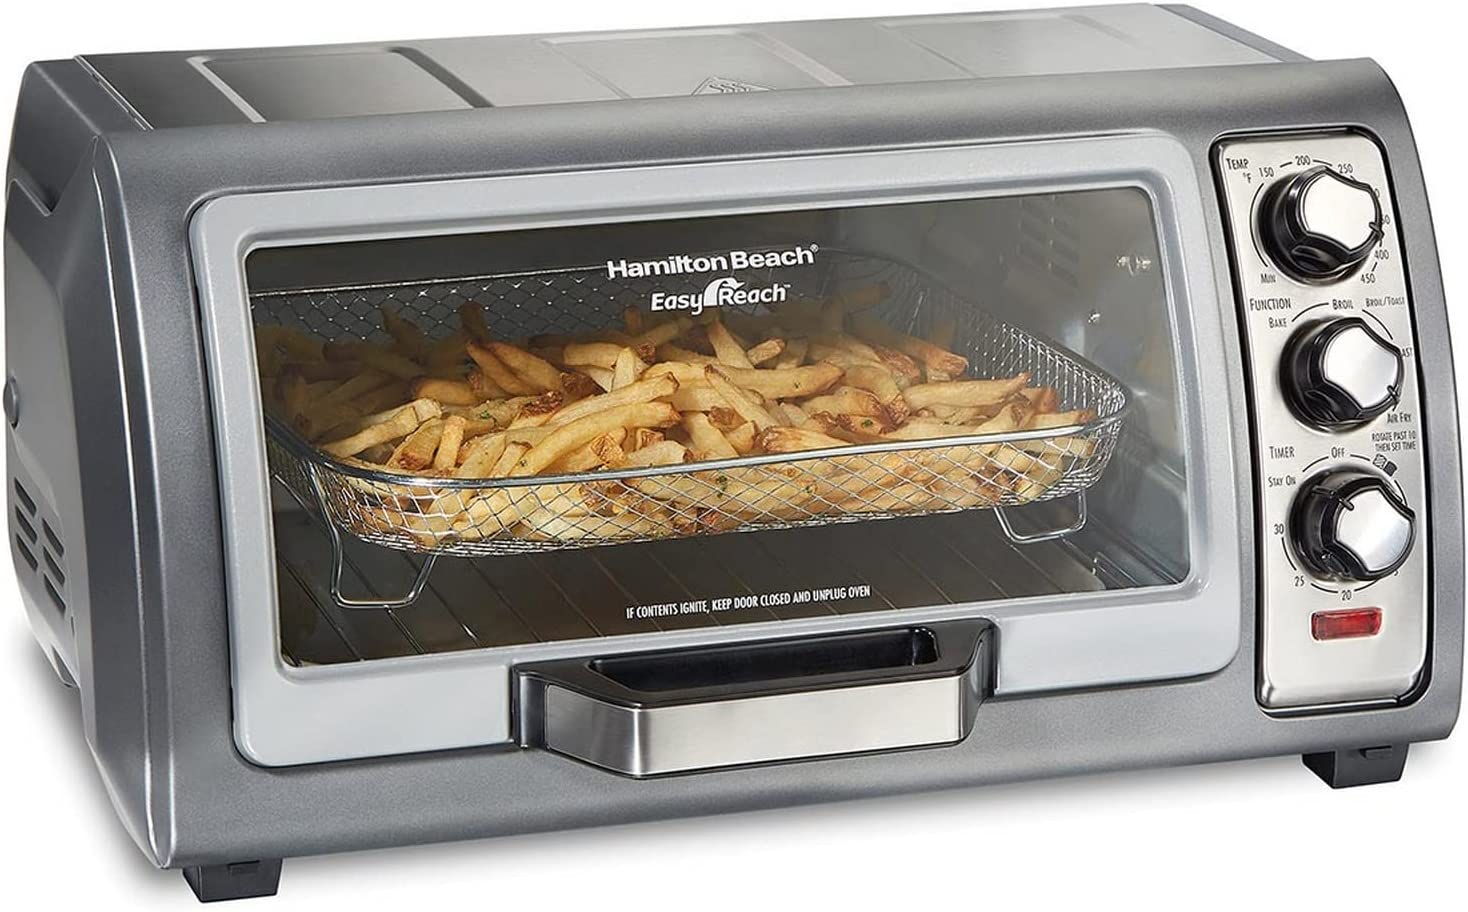 Hamilton Beach 31123D Easy-Clean Countered Knobs Convection Toaster Oven